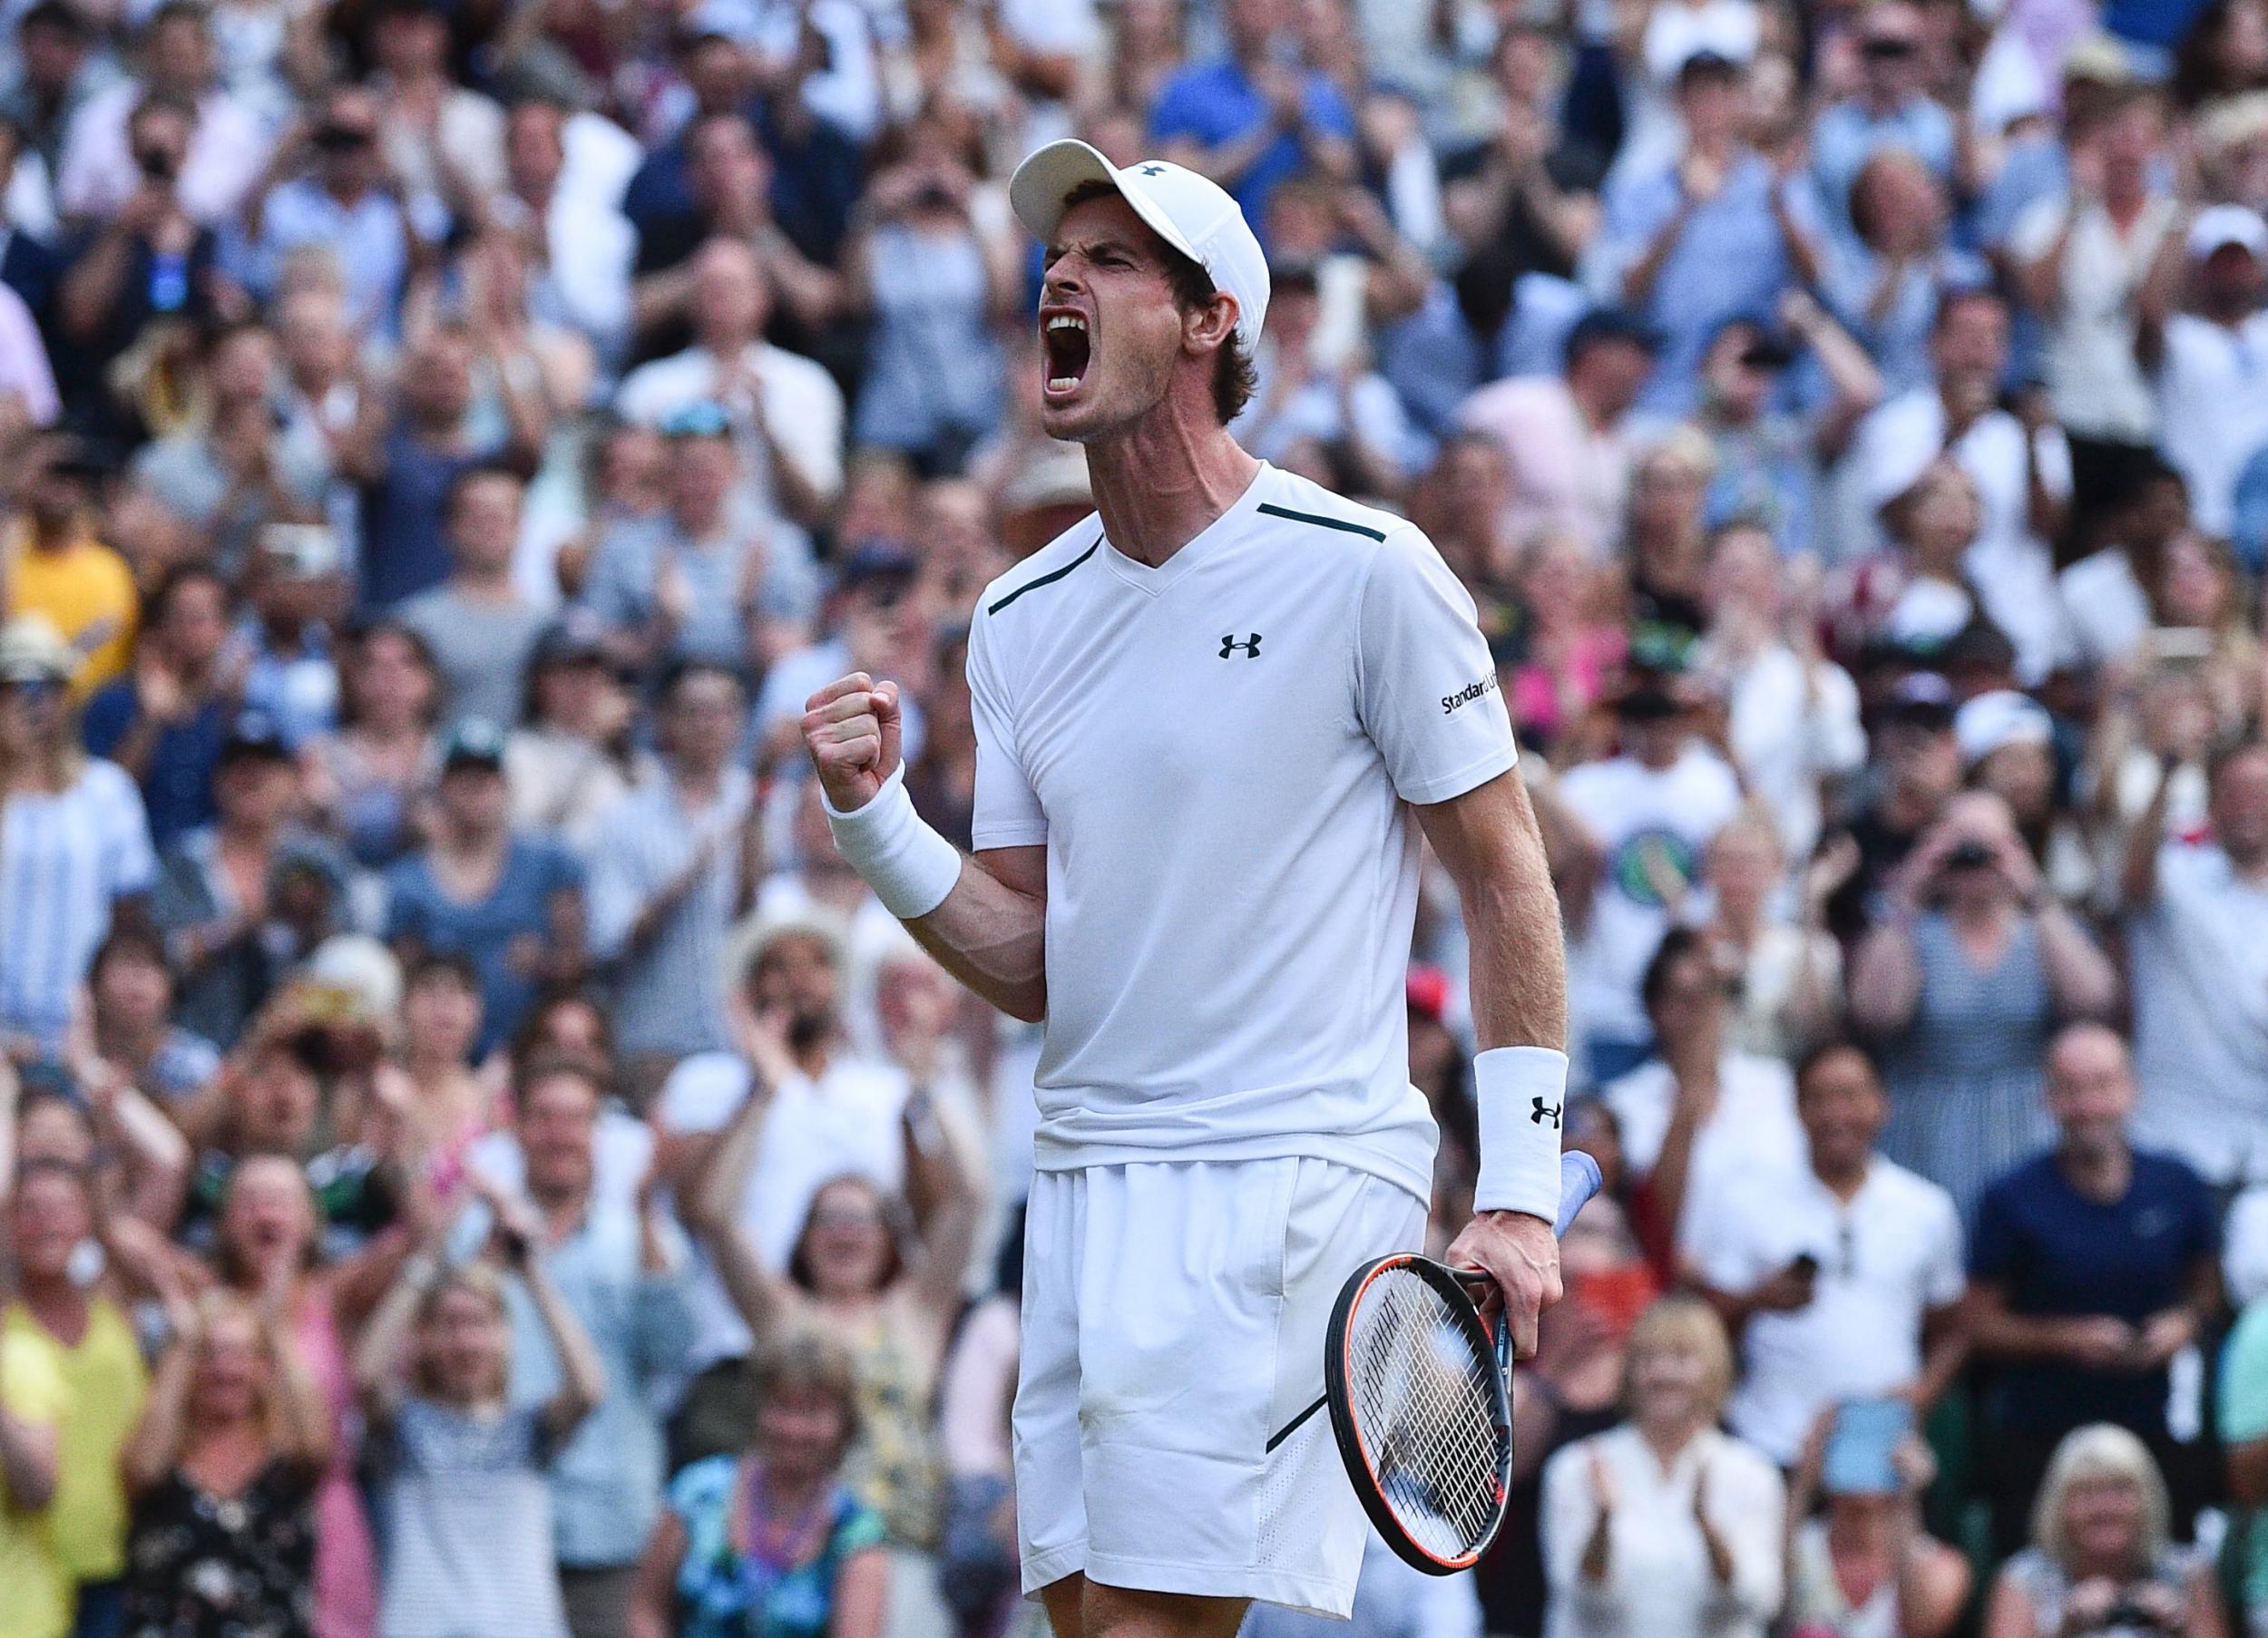 Murray's route to the final has cleared after Nadal's shock exit